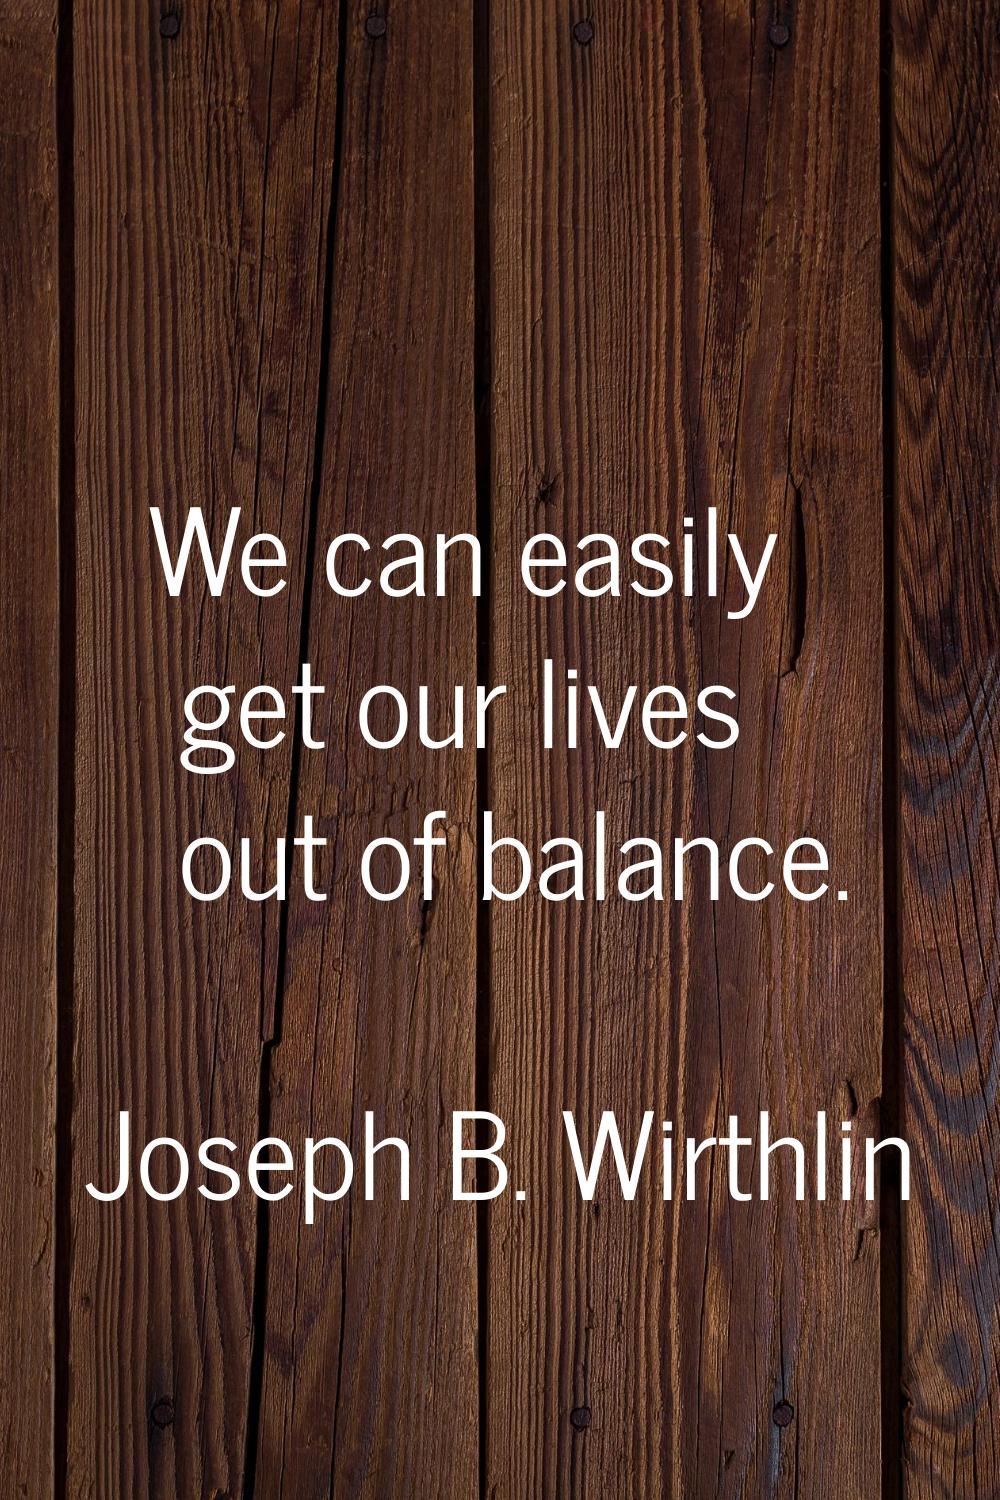 We can easily get our lives out of balance.